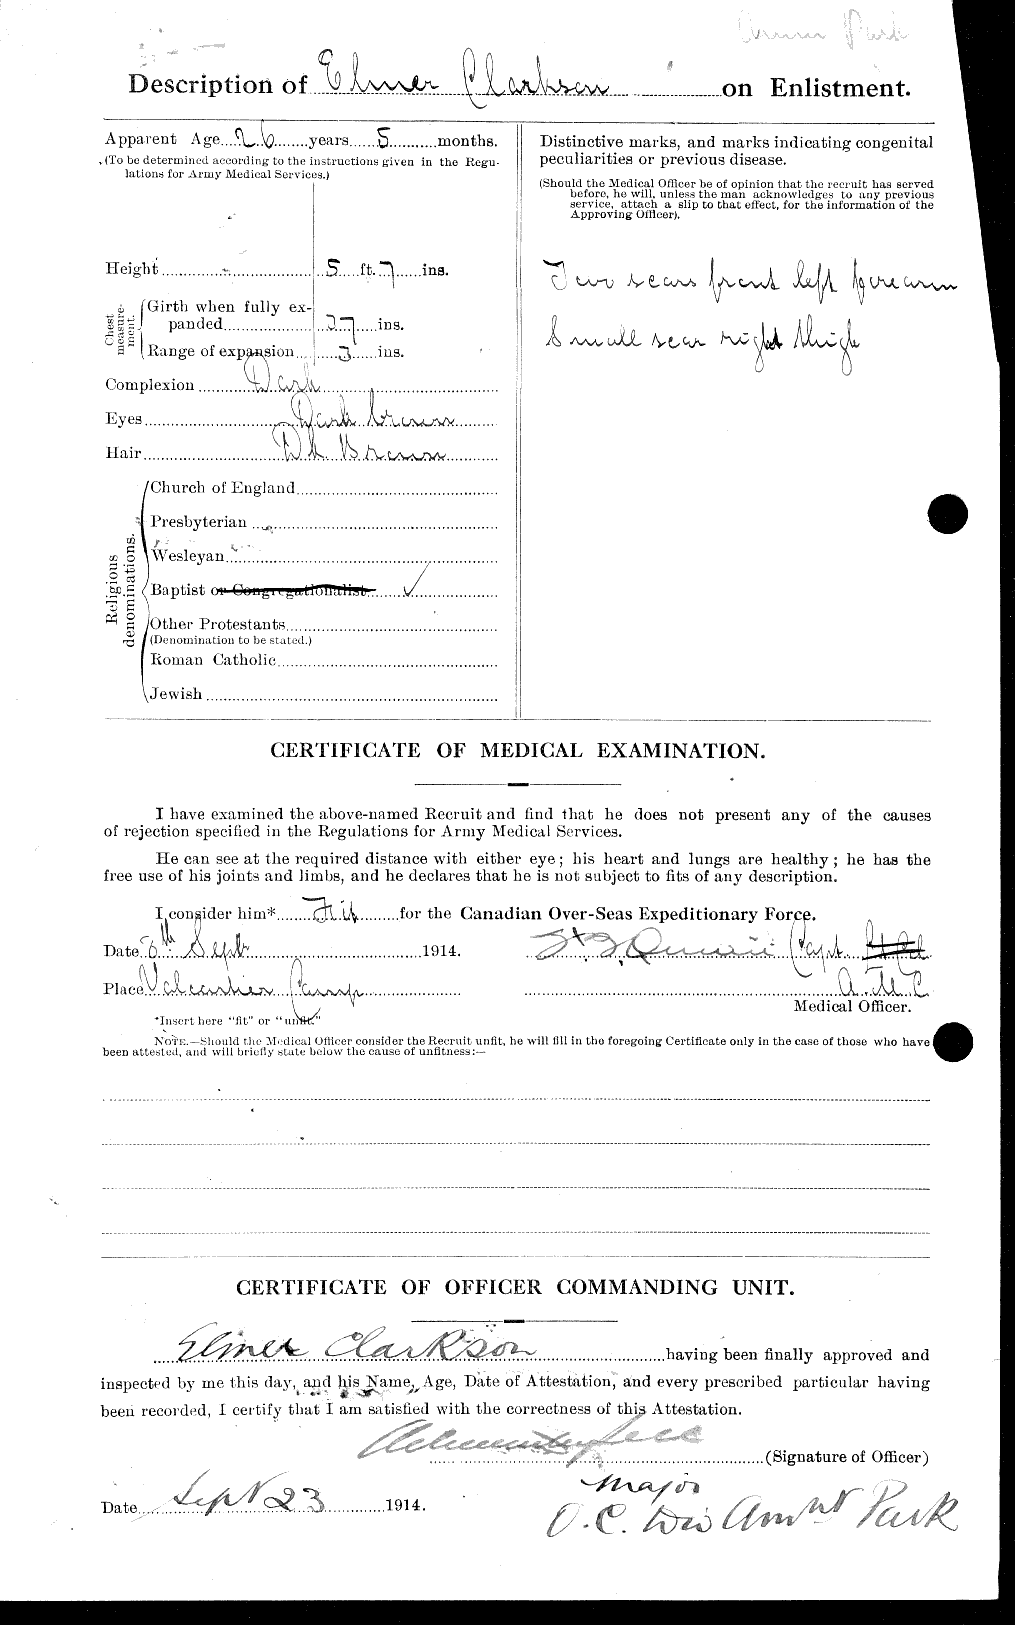 Personnel Records of the First World War - CEF 023633b